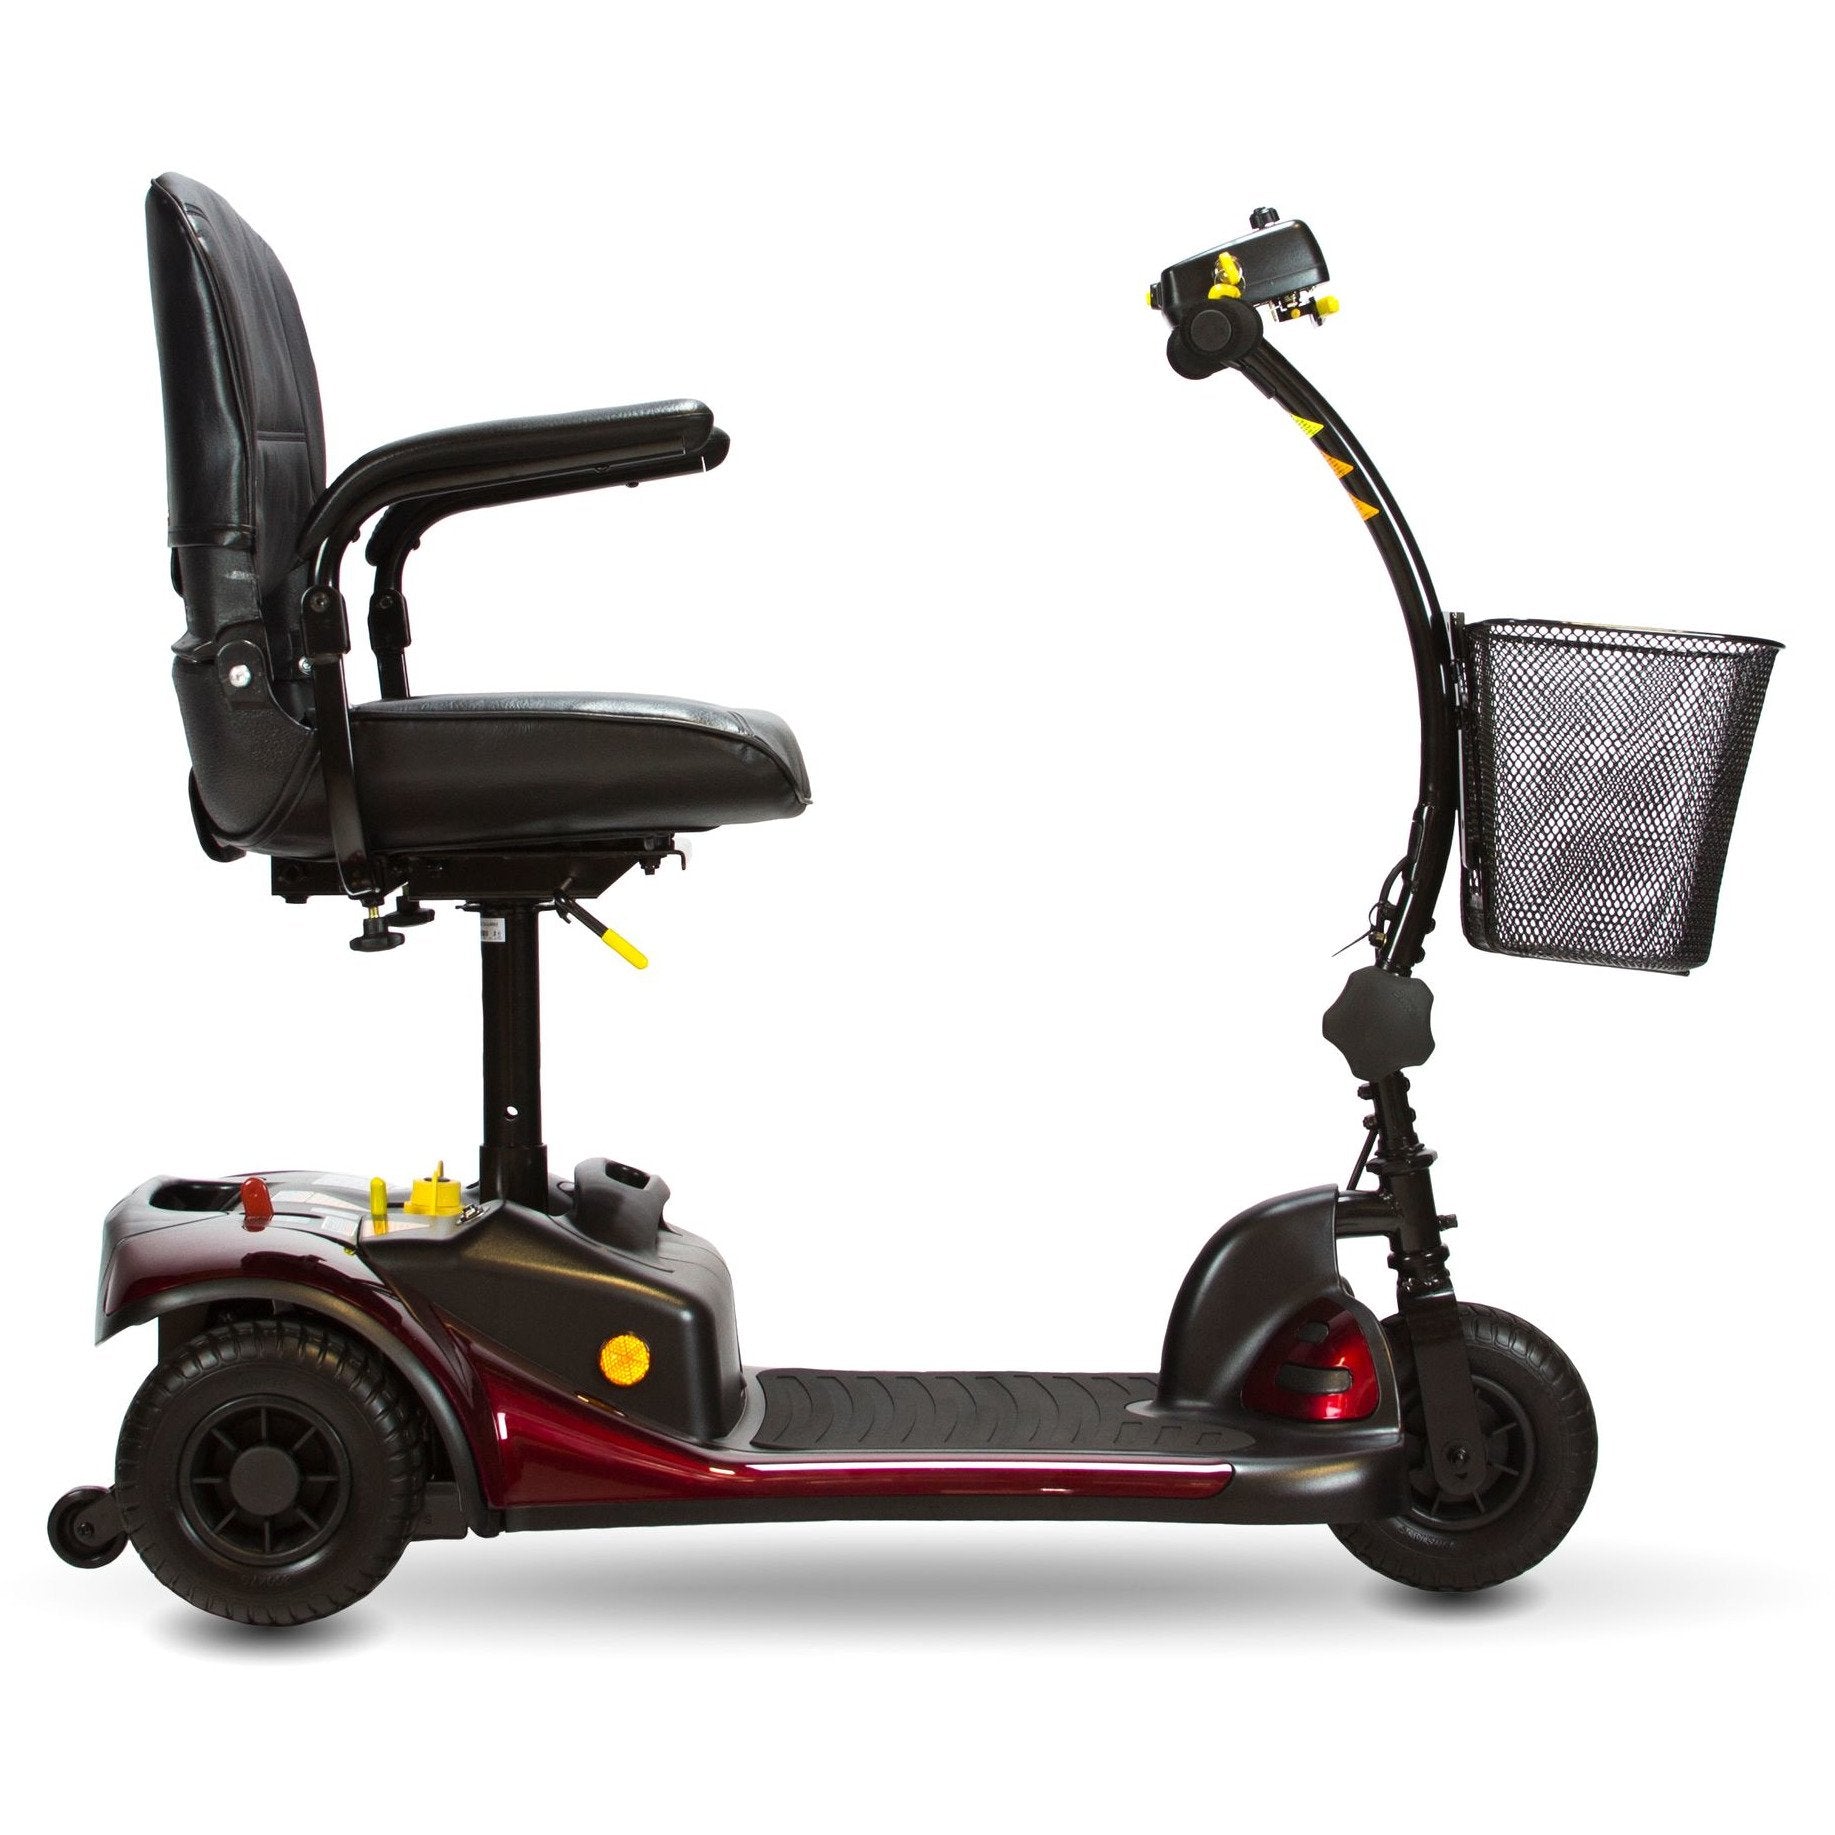 Side view of the dasher 3 travel friendly portable lightweight mobility scooter - color red and black - pureups 